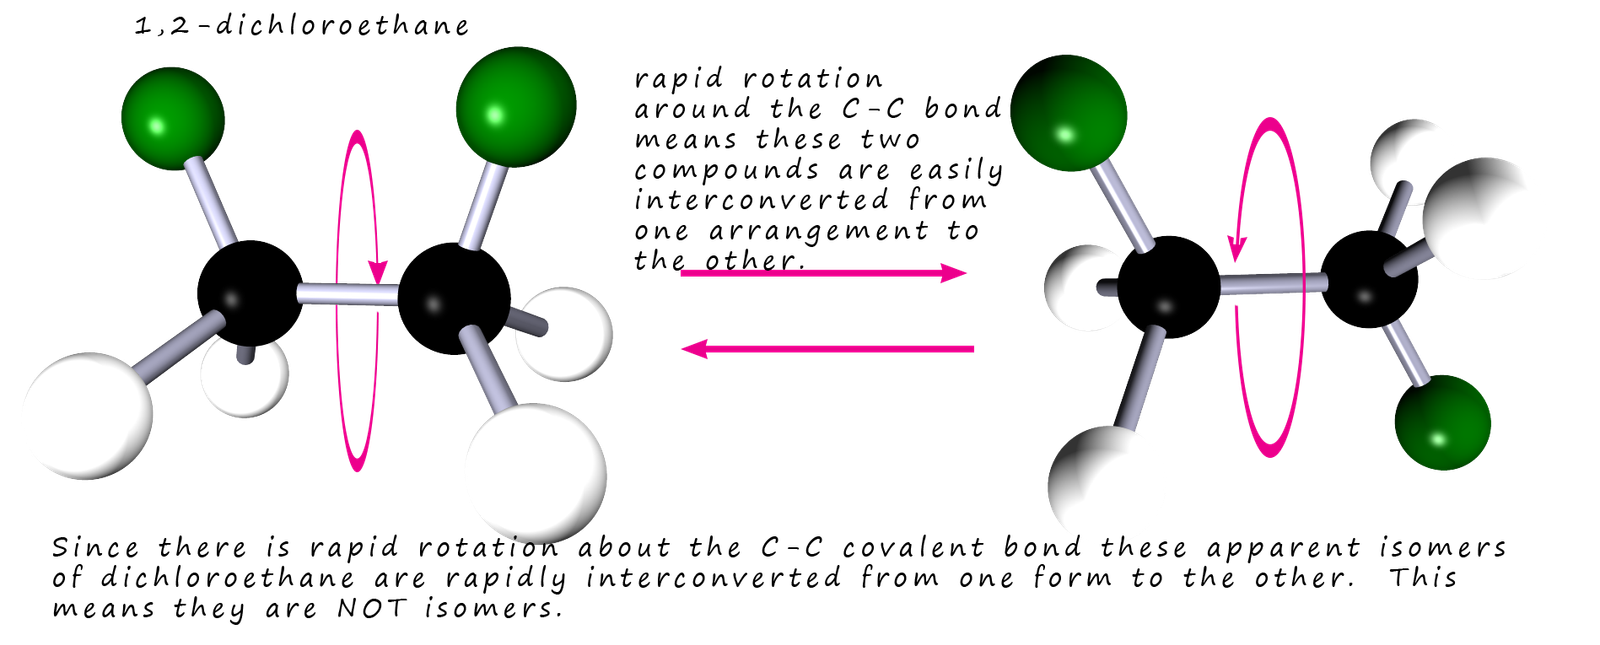 3d models of possible stereoisomers.